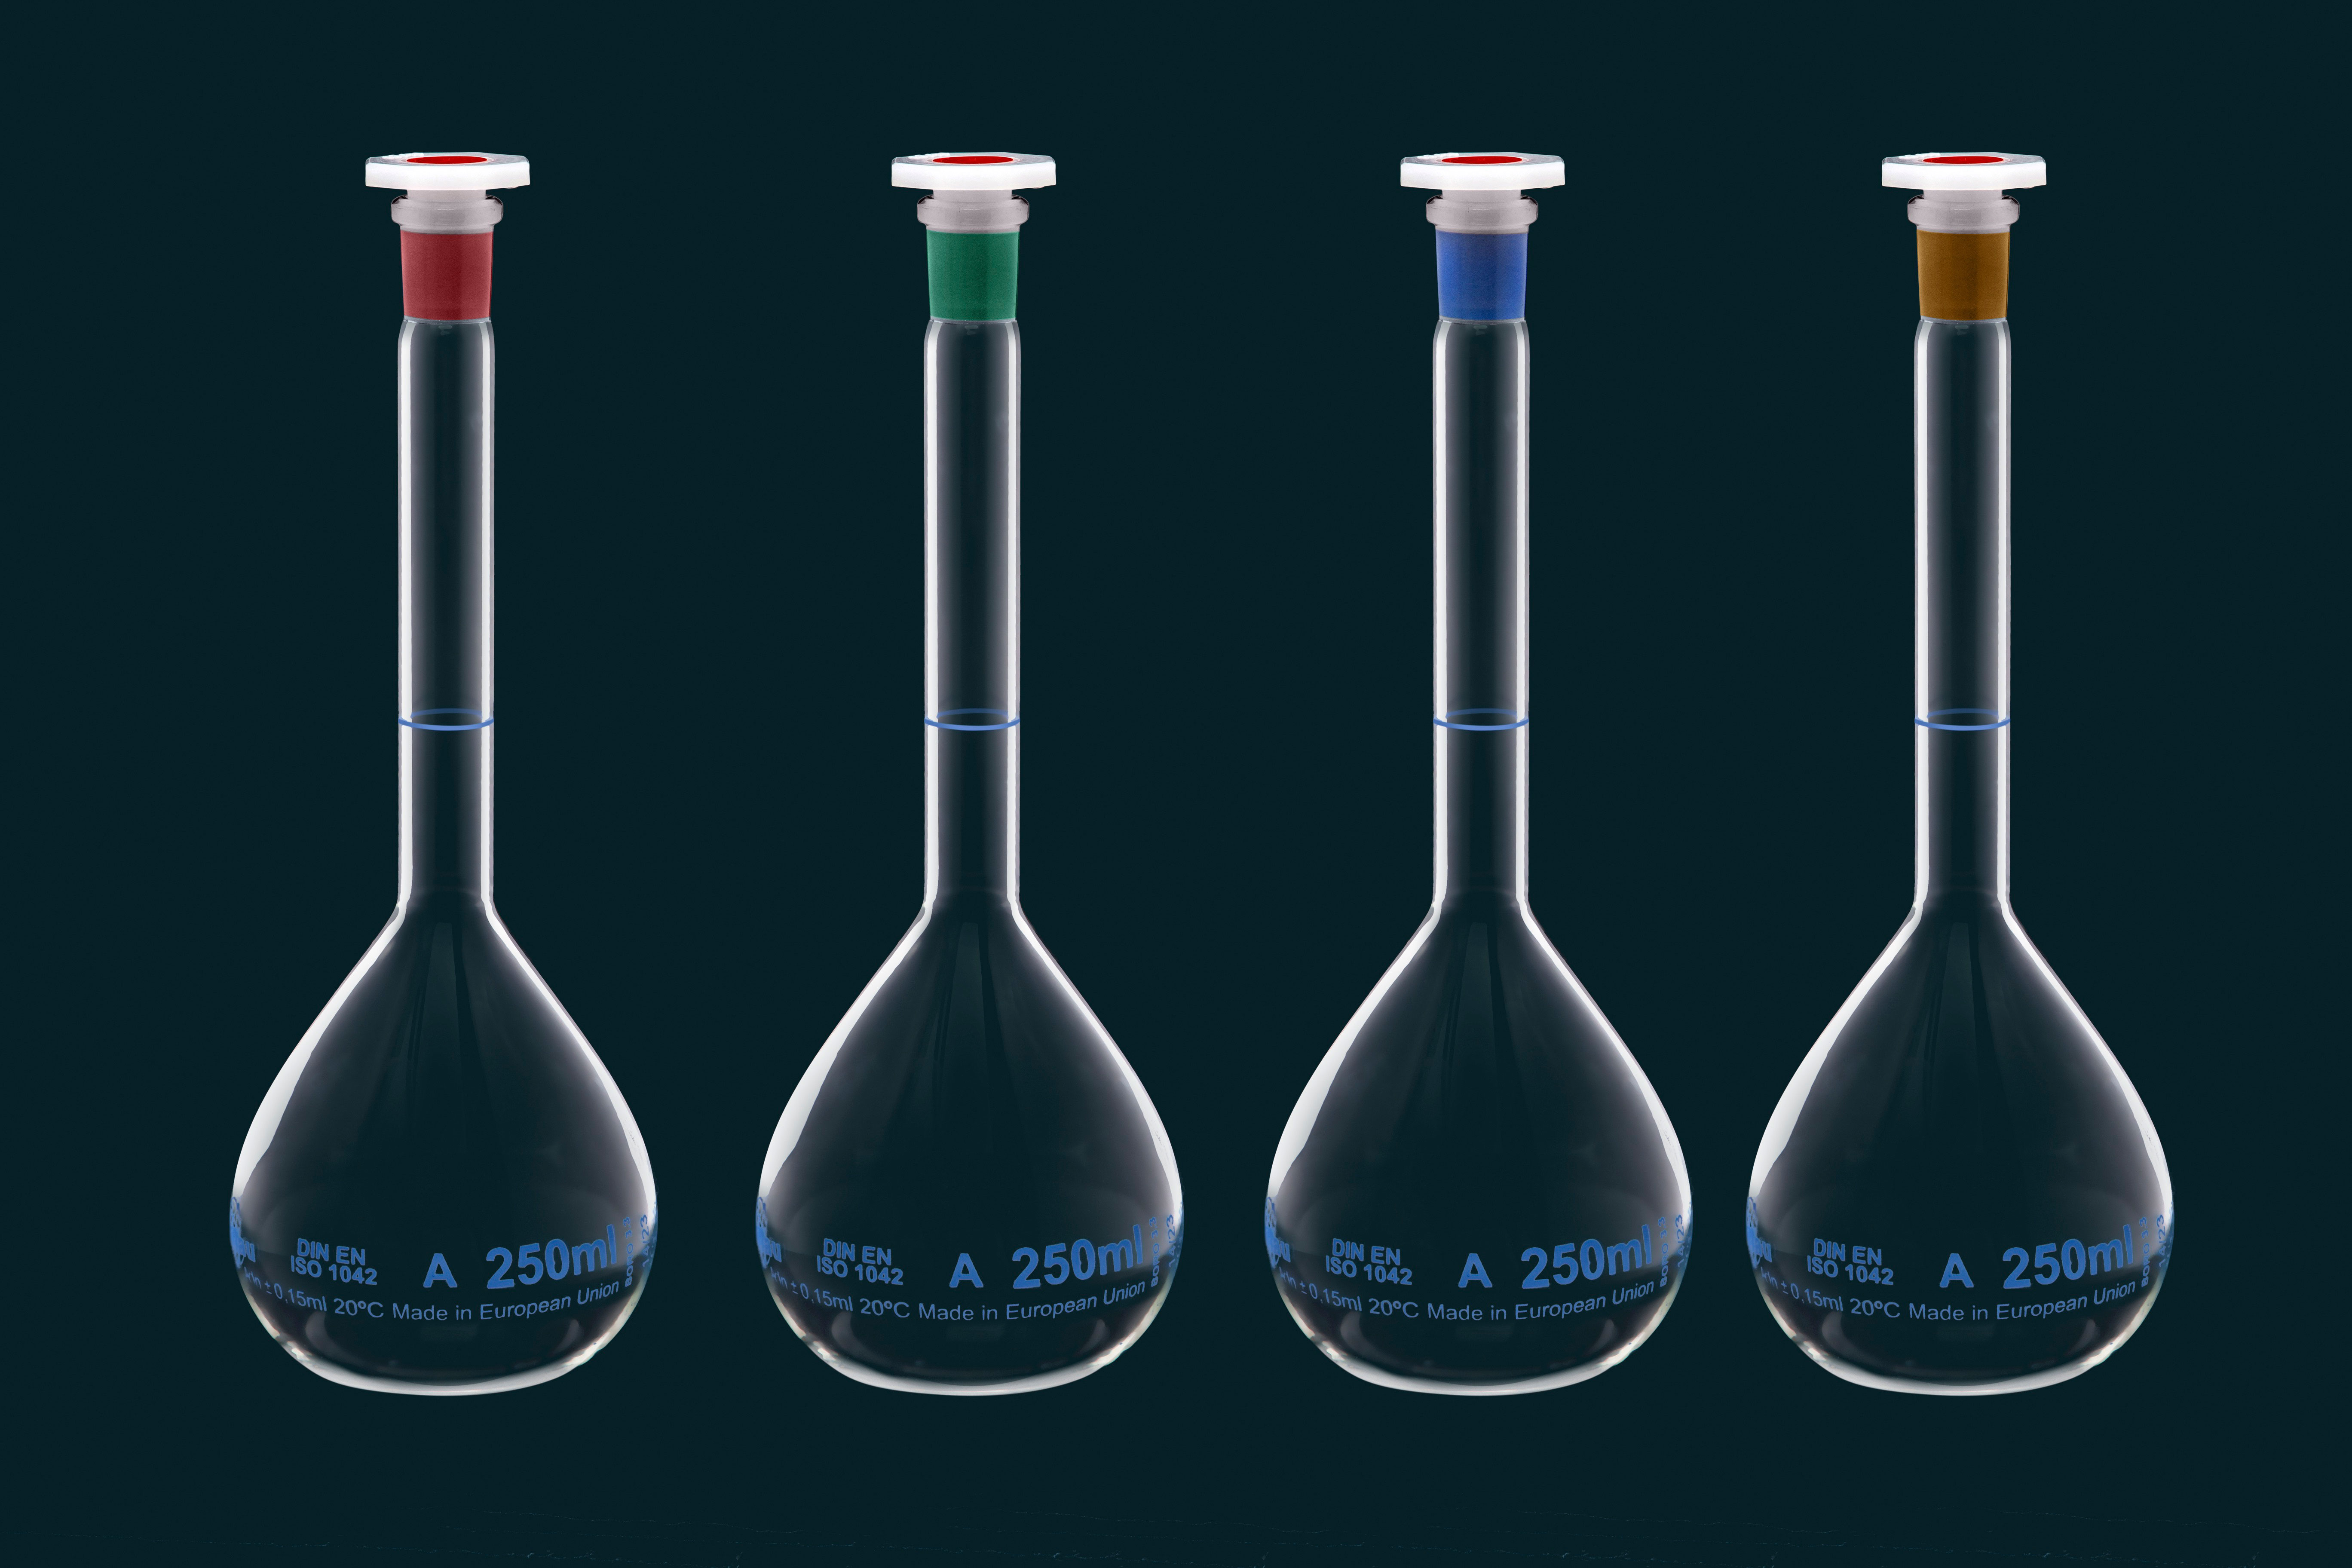 Volumetric flask with blue neck, Class A, 25ml, with PE stopper, lot number and certificate of conformity